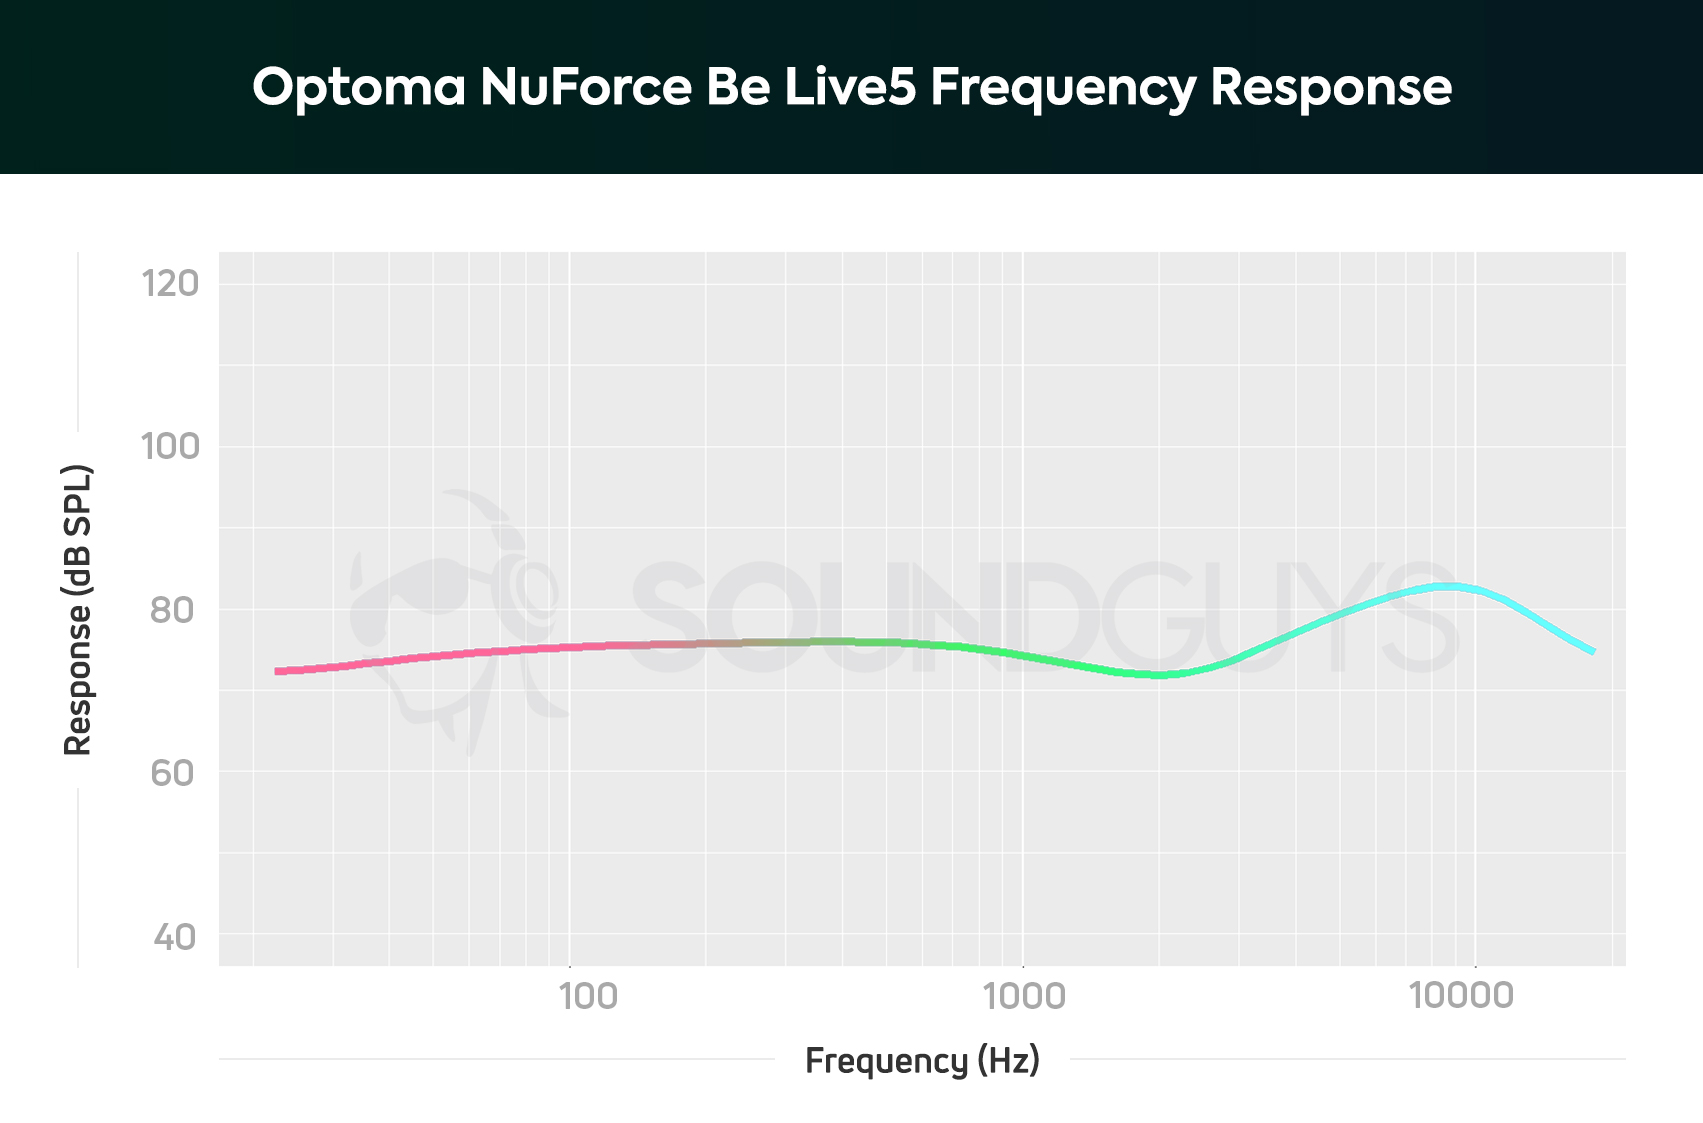 Optoma NuForce Be Live5: A chart showing the Bluetooth frequency respons.